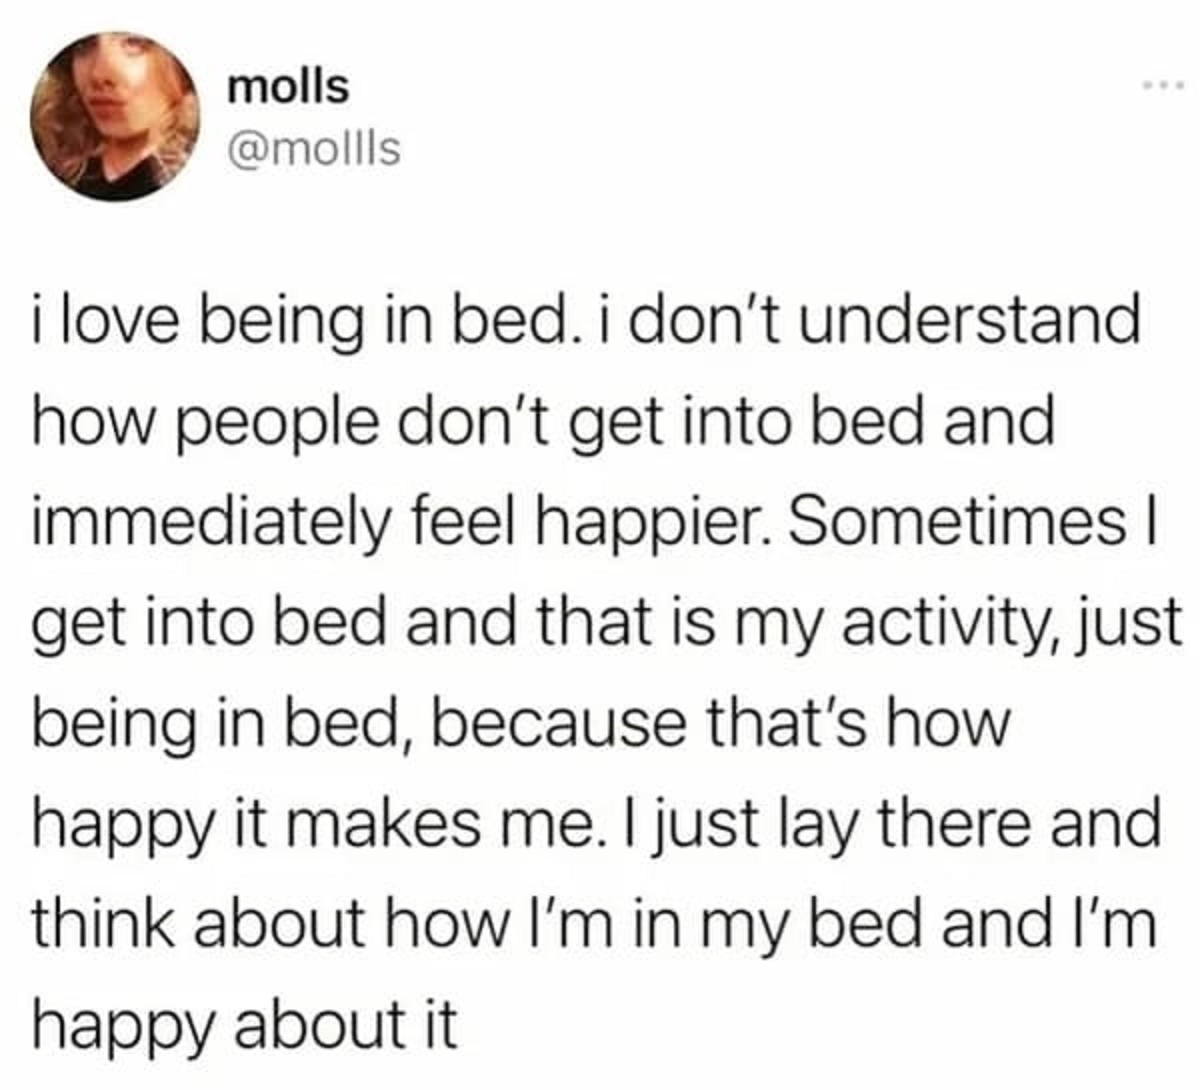 paper - molls i love being in bed. i don't understand how people don't get into bed and immediately feel happier. Sometimes I get into bed and that is my activity, just being in bed, because that's how happy it makes me. I just lay there and think about h